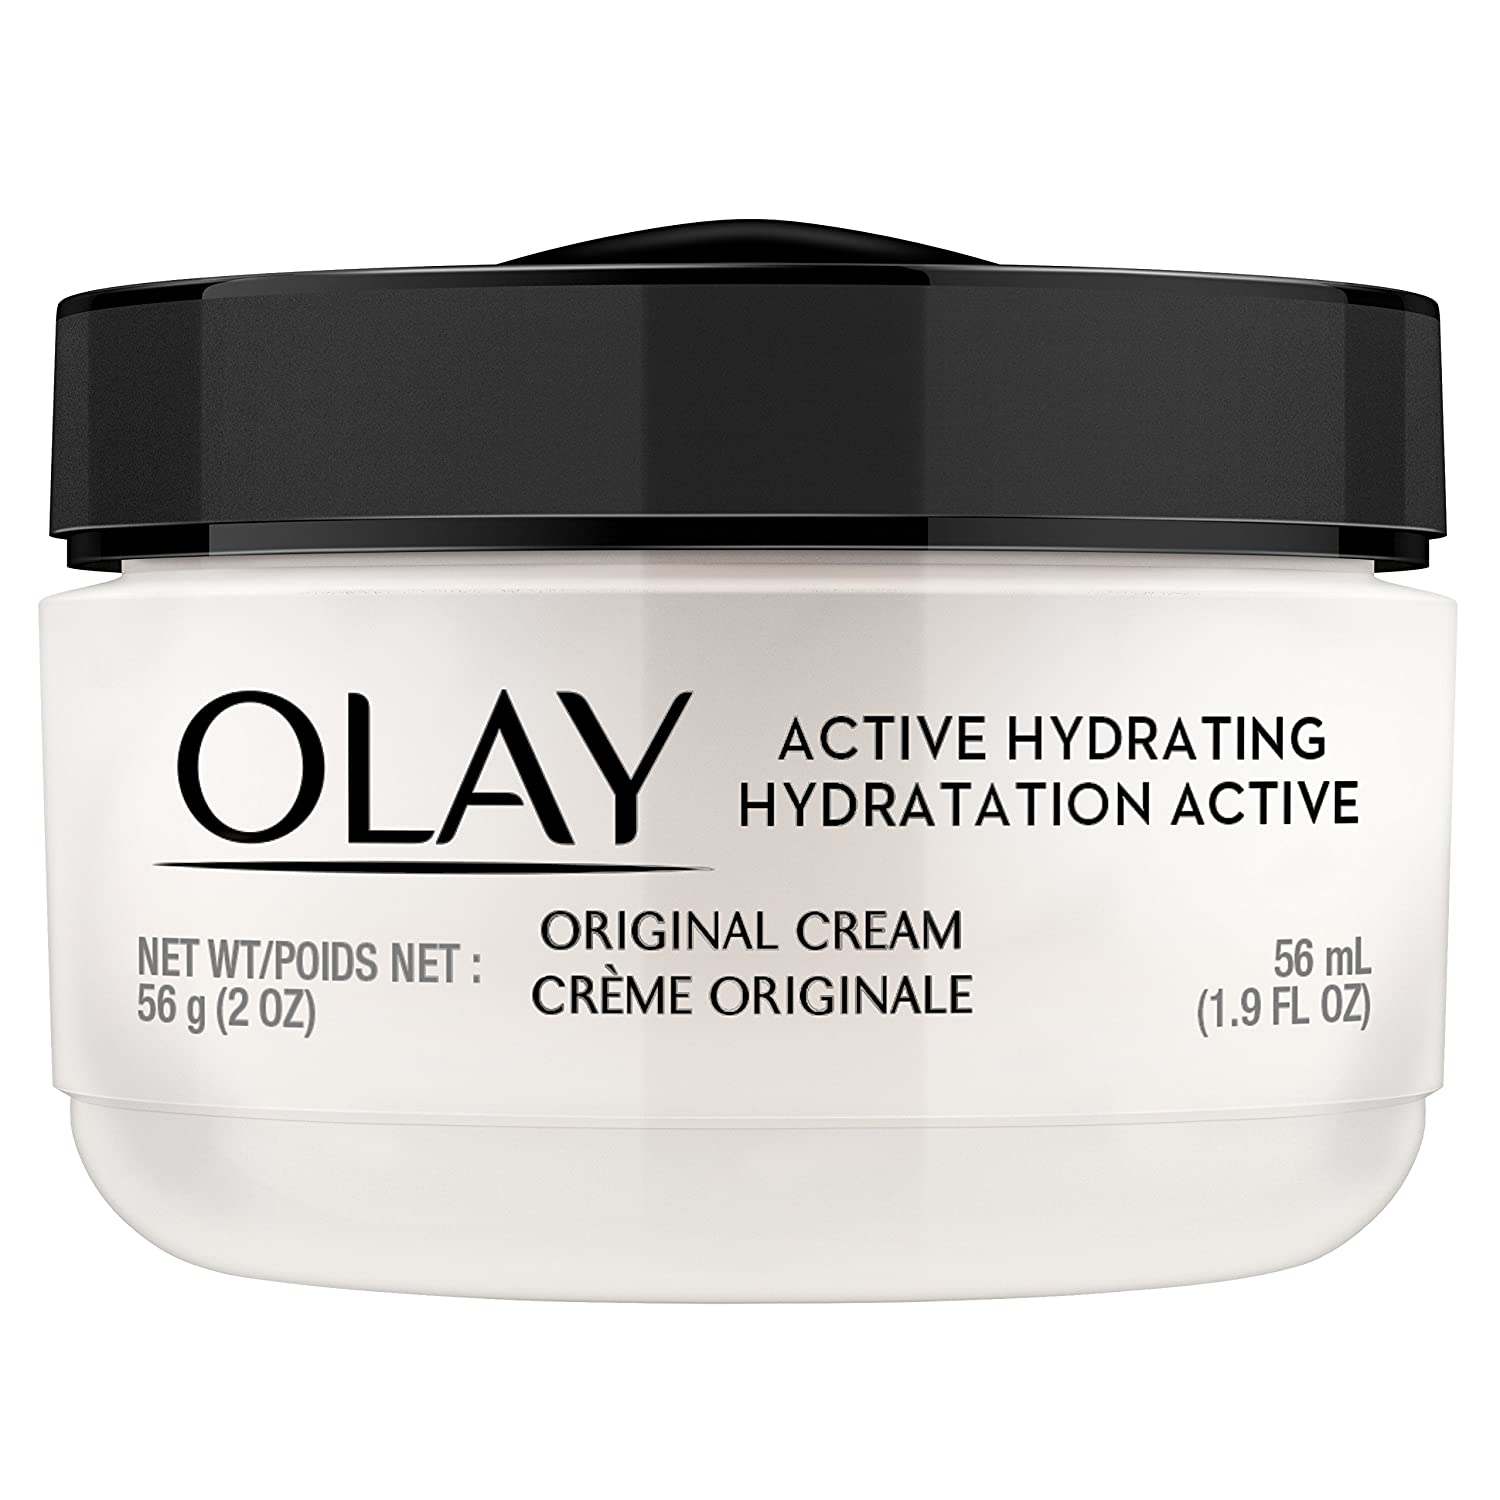 1.9-Oz Olay Active Hydrating Cream Face Moisturizer $4.50 + Free Shipping w/ Prime or on $25+